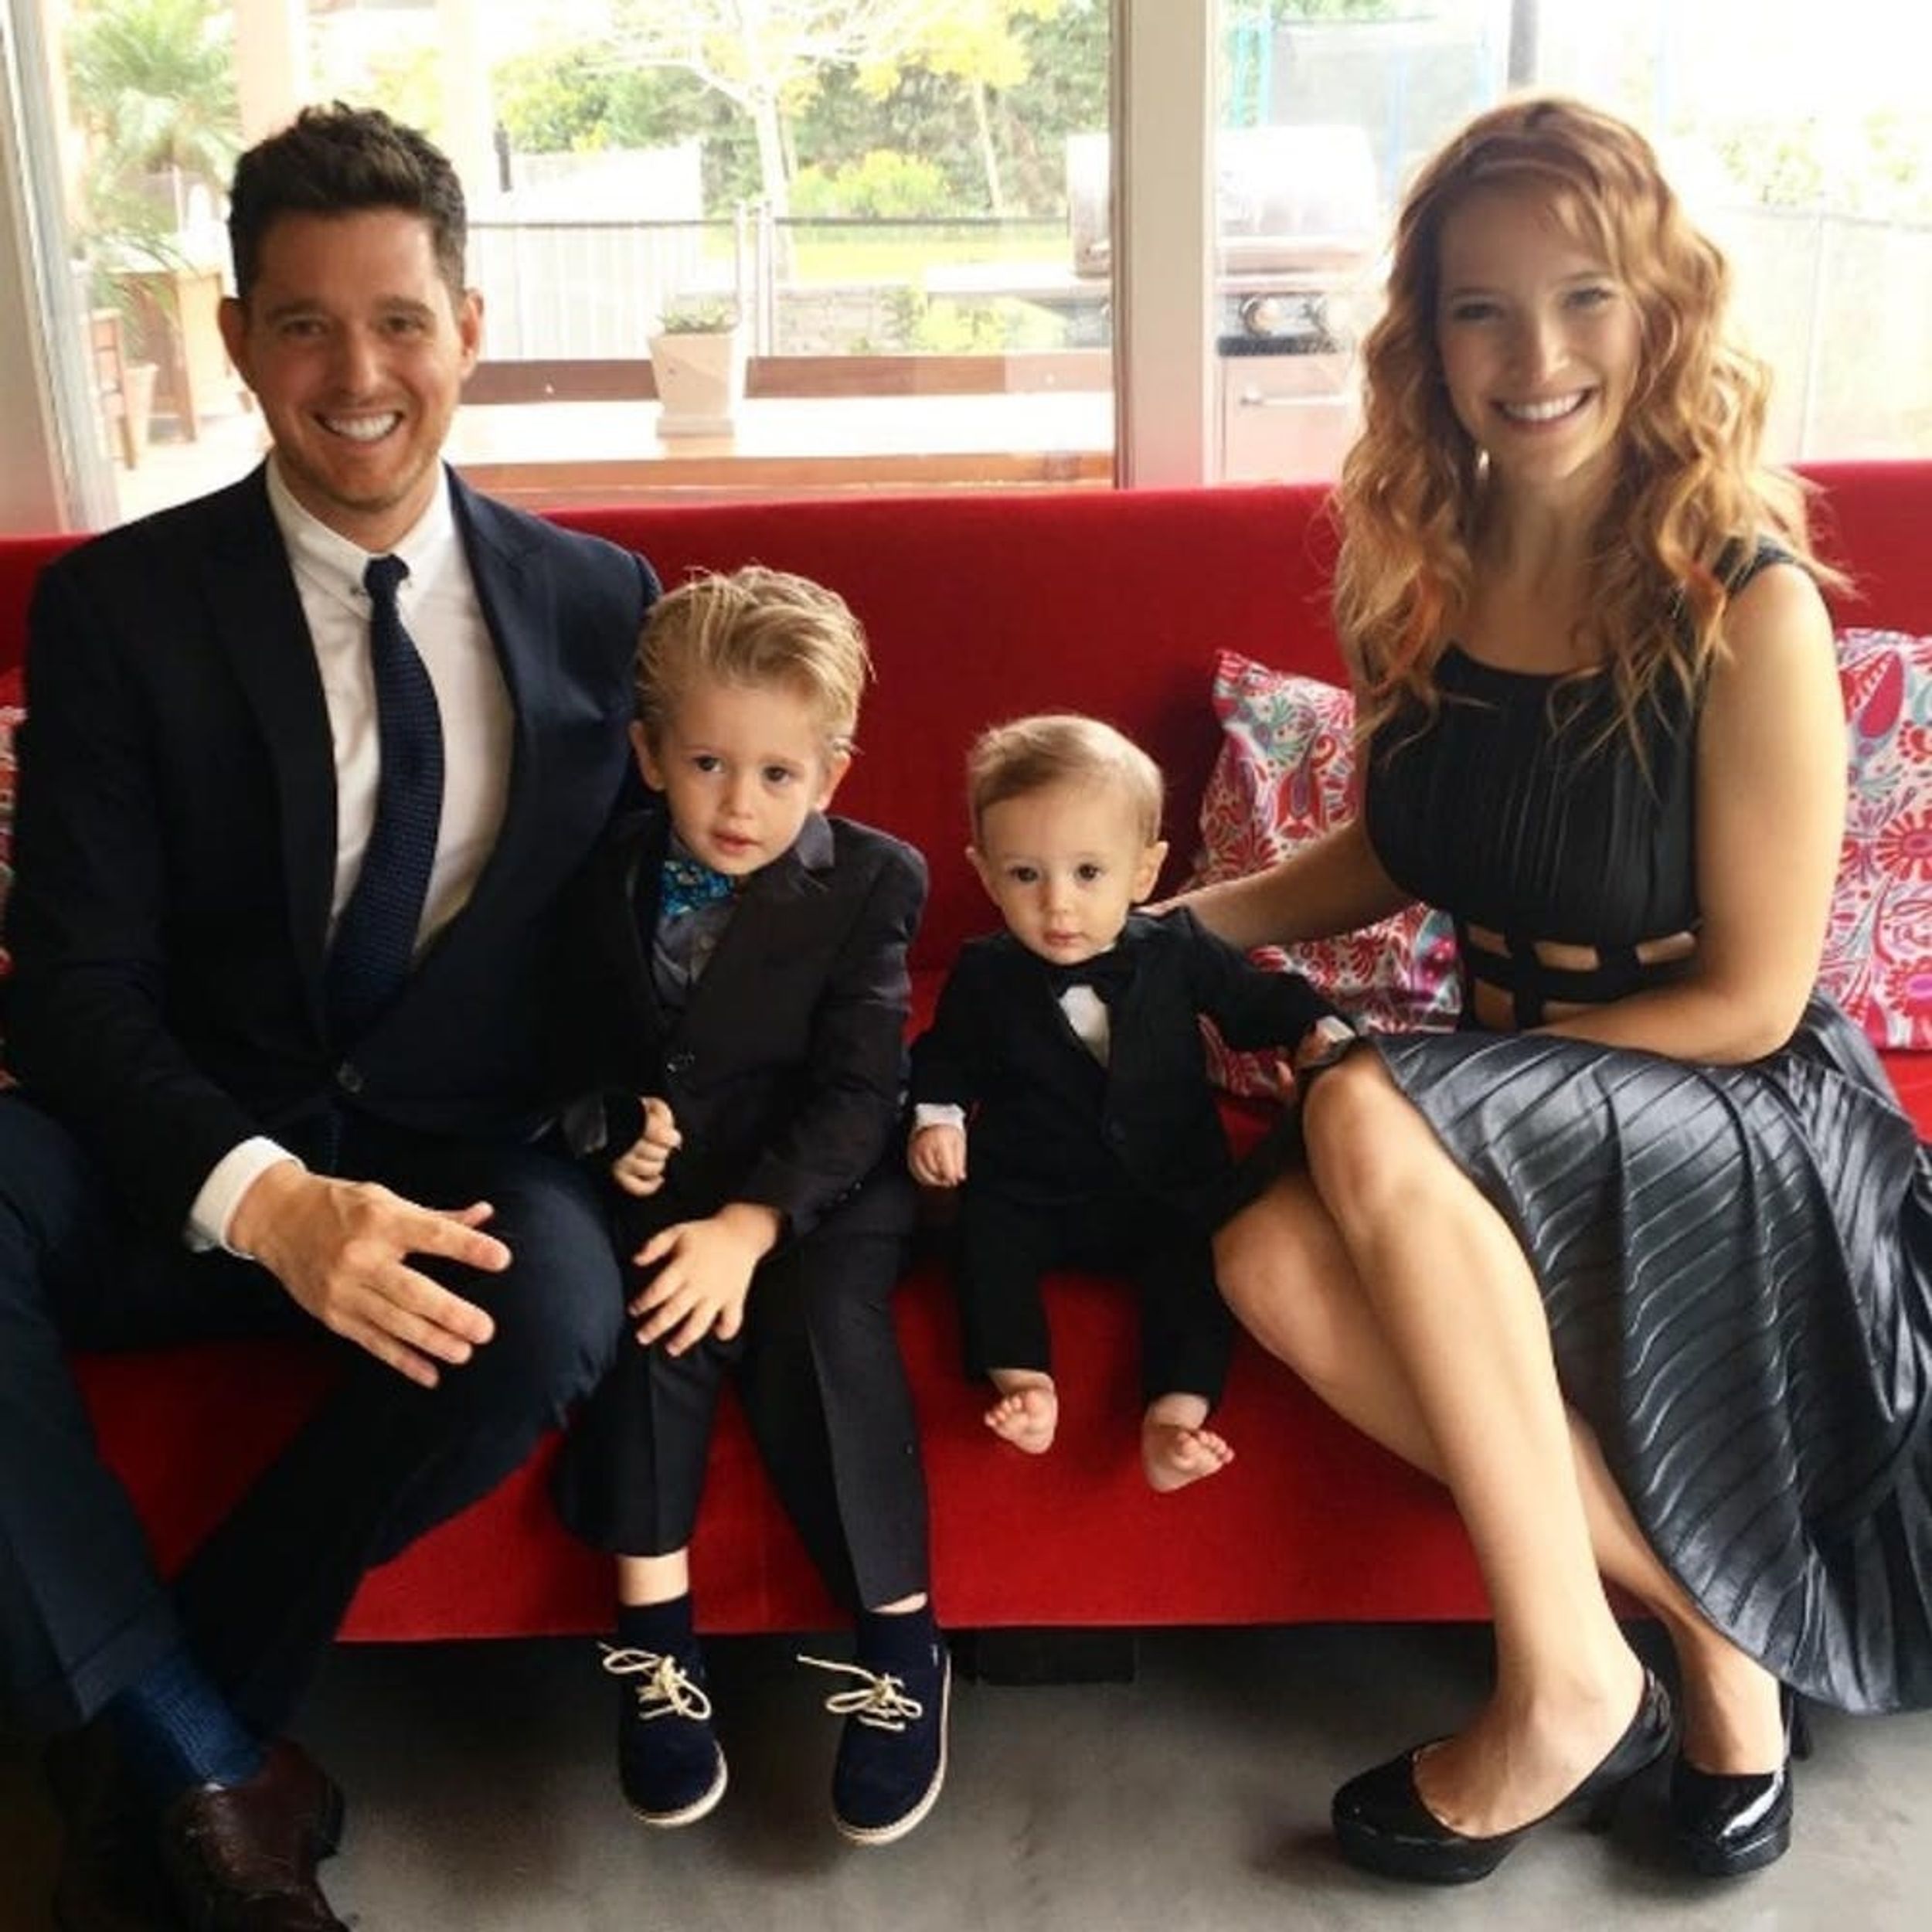 Michael Bublé’s 3-Year-Old Son Is Officially Cancer-Free